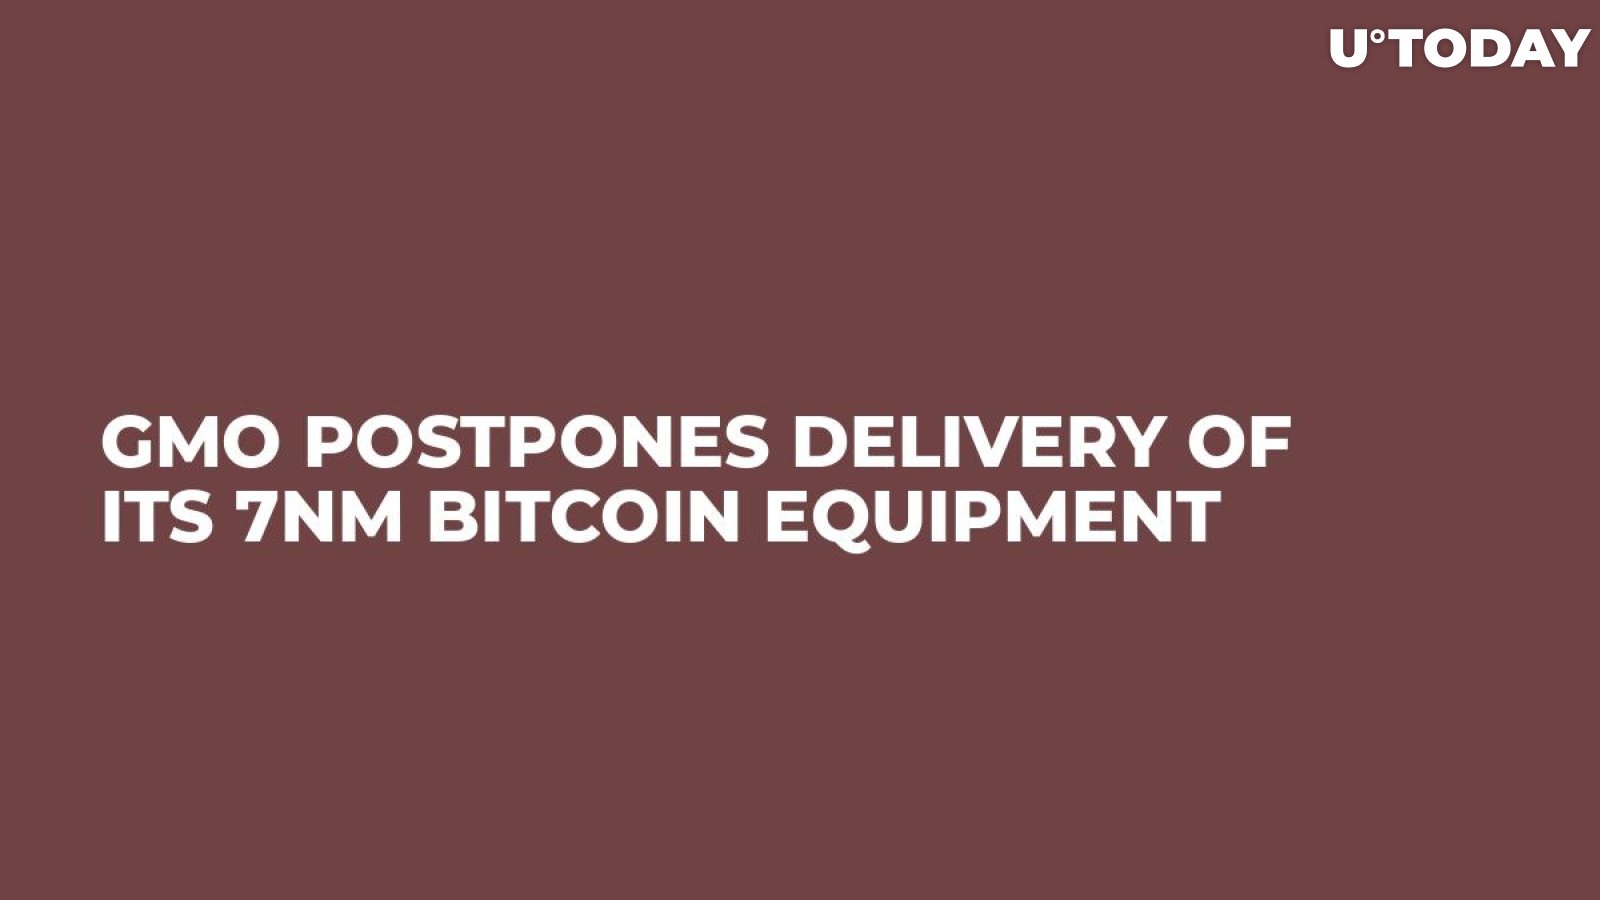 GMO Postpones Delivery Of Its 7nm Bitcoin Equipment